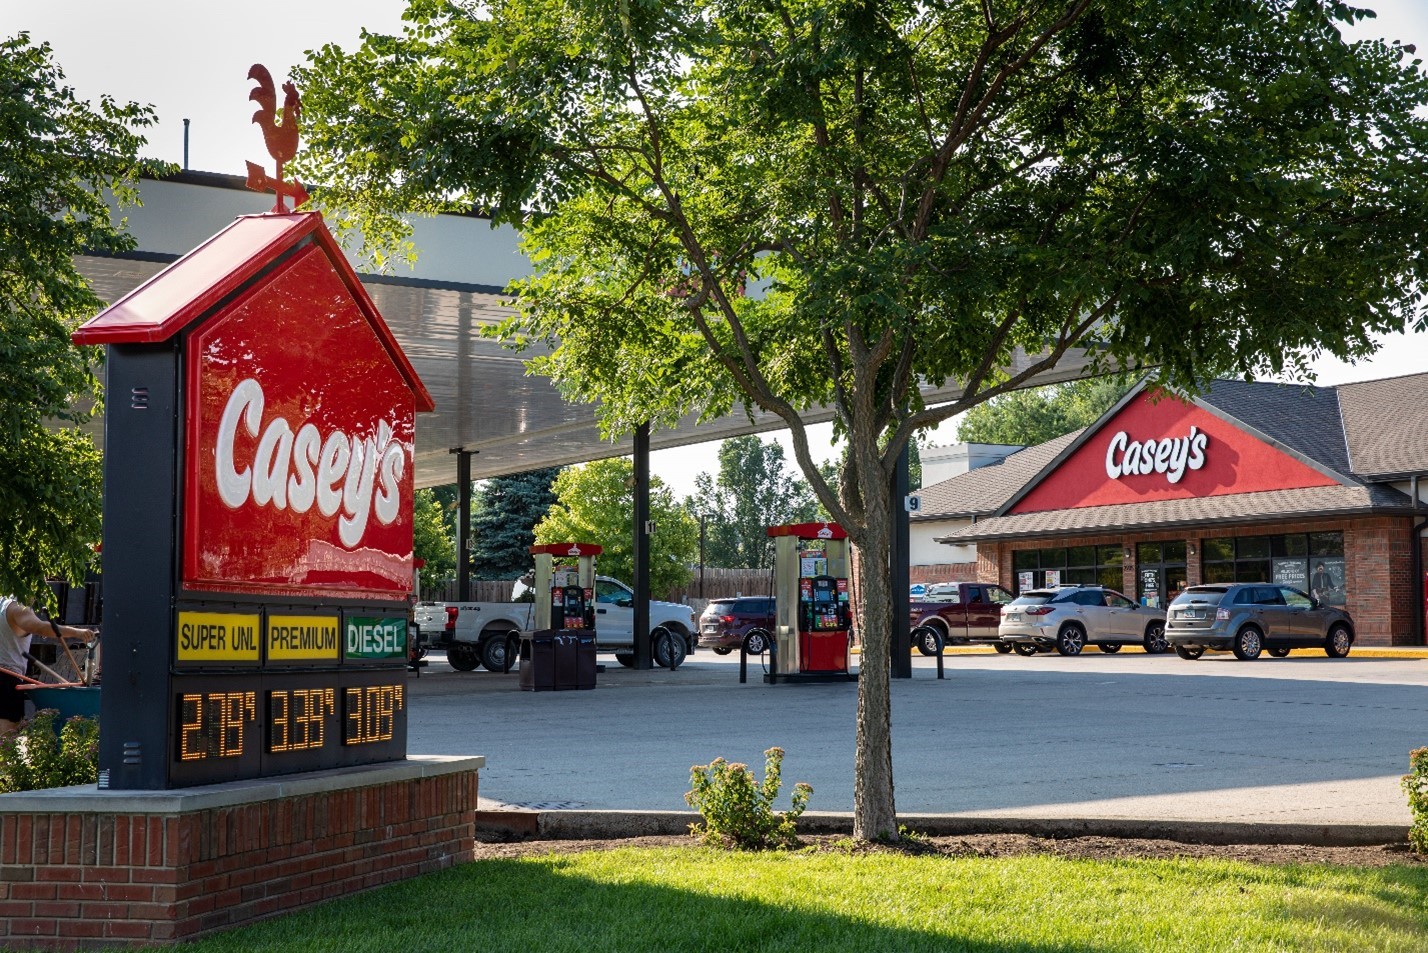 Casey’s offers guests handmade pizza, a growing variety of snacks and drinks, and quality fuel to keep them on the go.